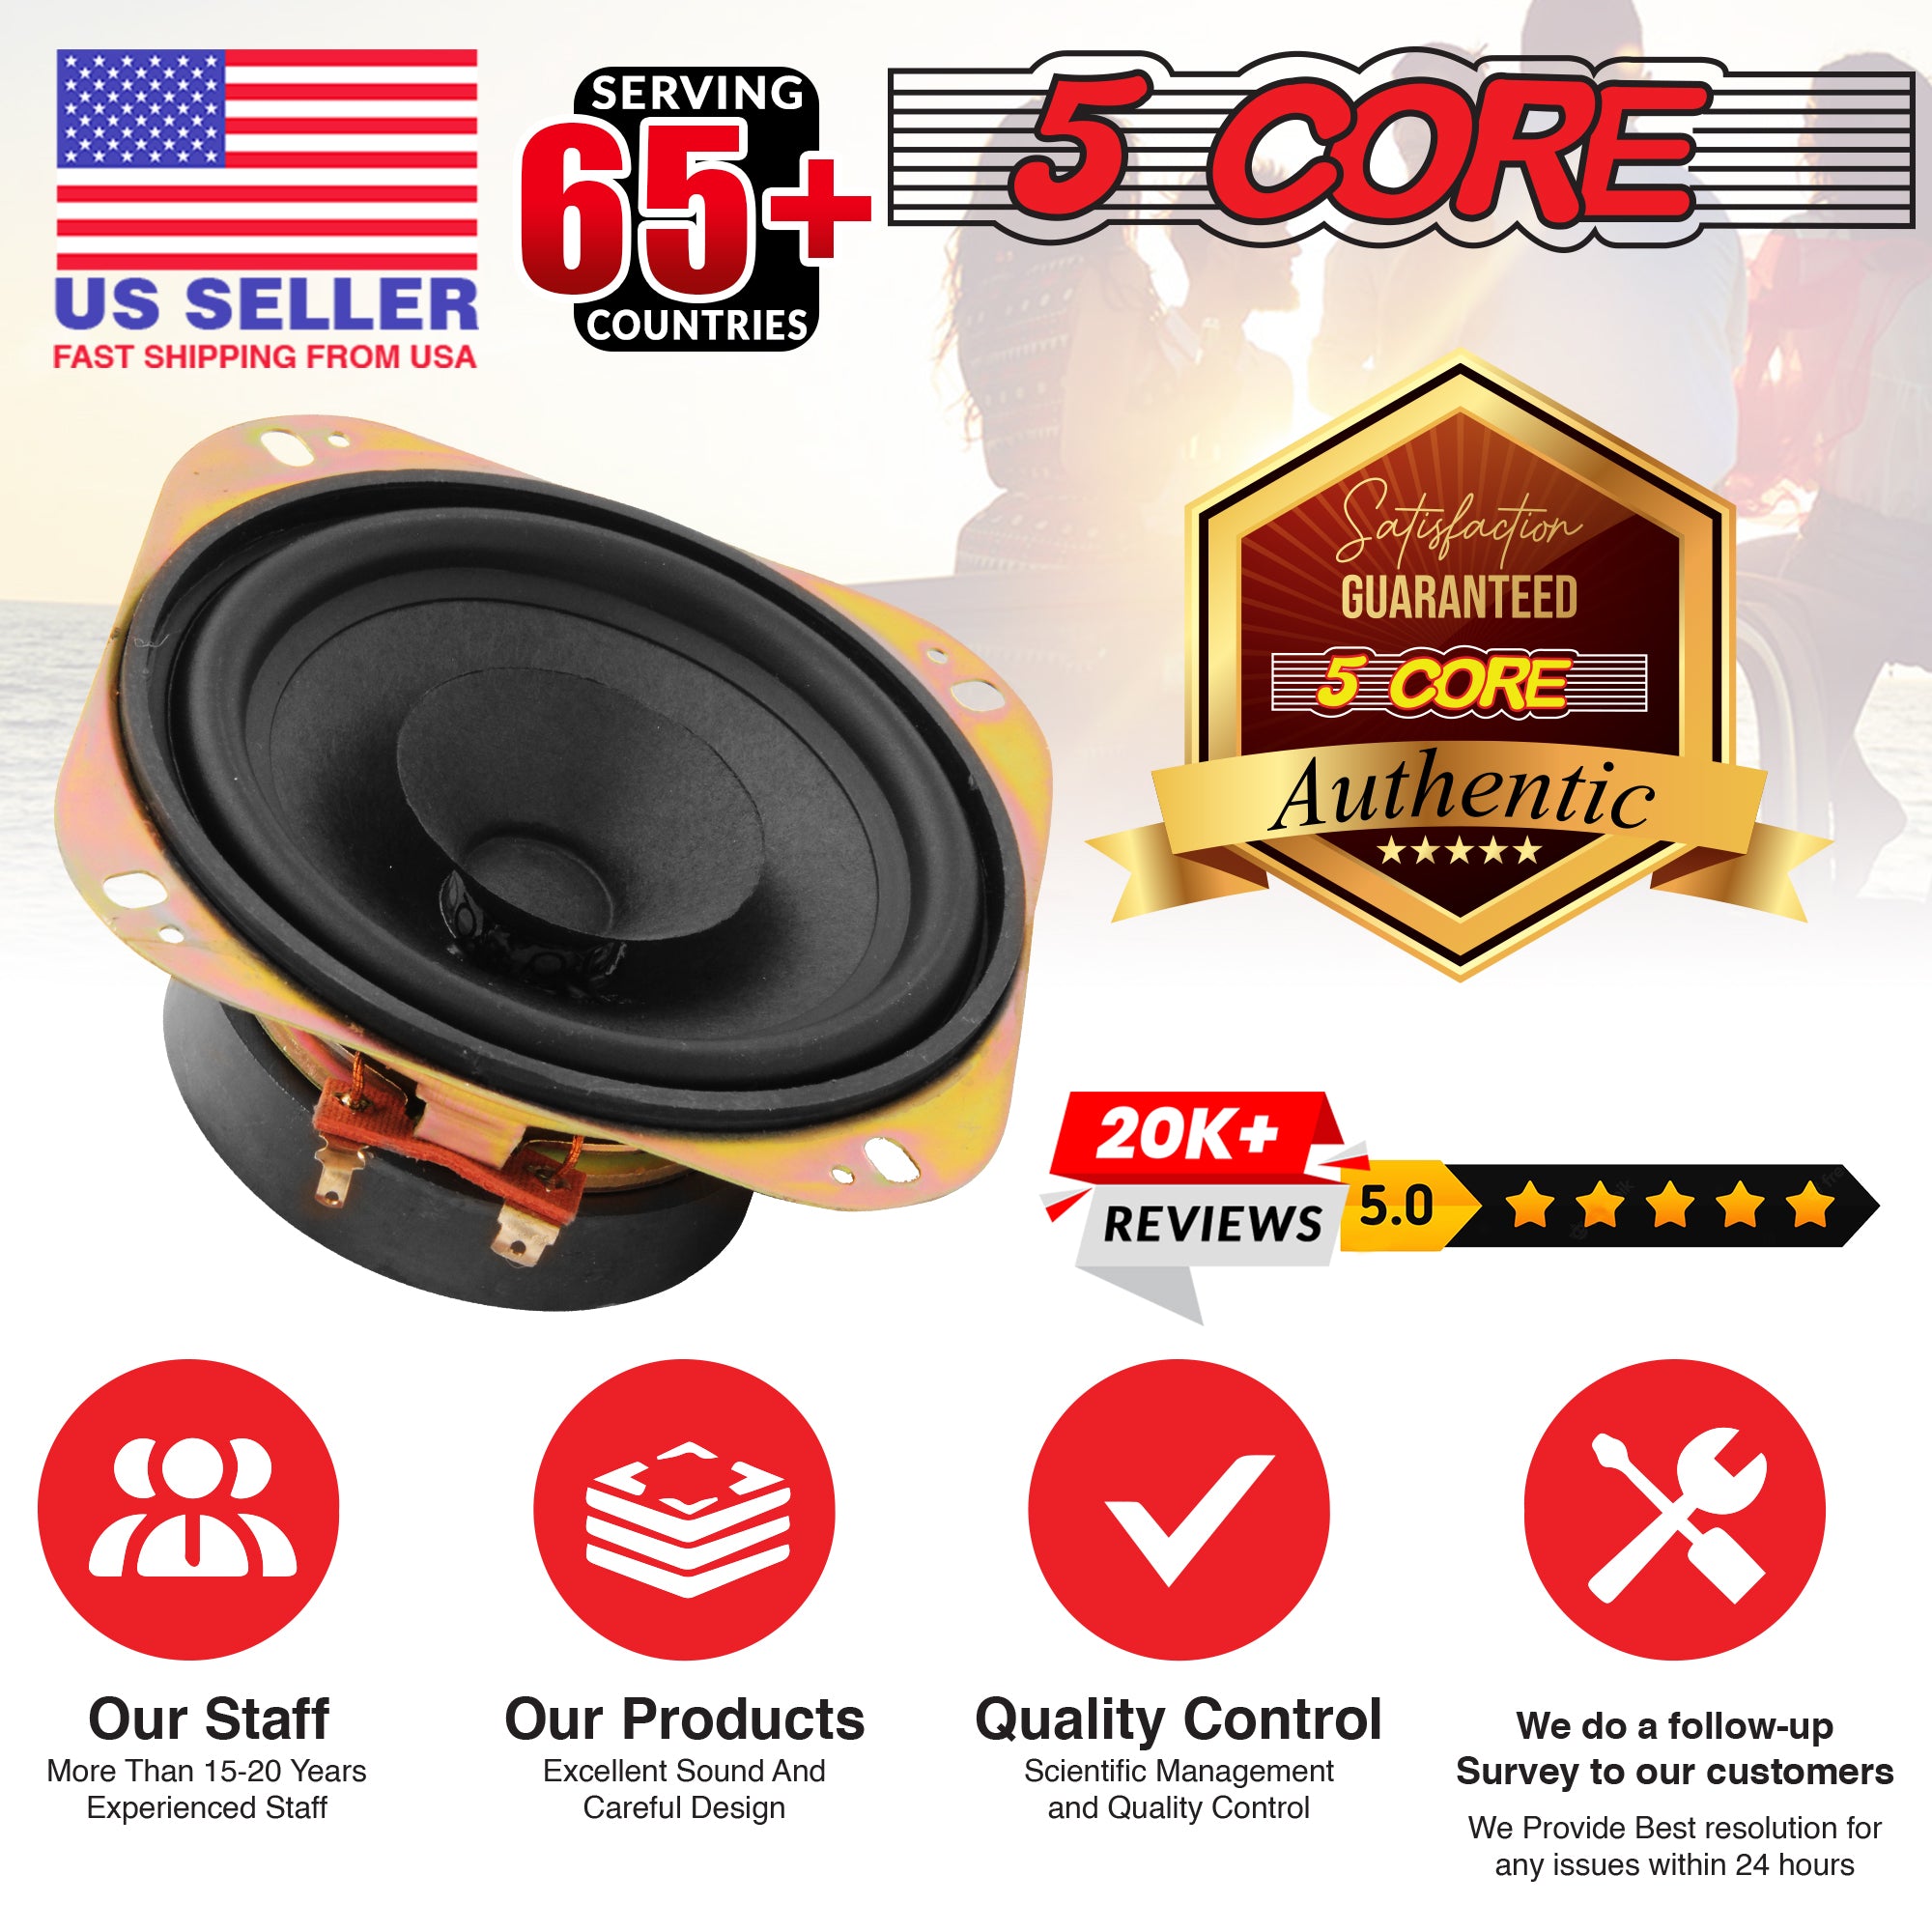 5 Core 4 Inch Subwoofer 2 Pack • 200W Peak 4 Ohm Replacement Car Bass Sub Woofer w 0.81" Voice Coil